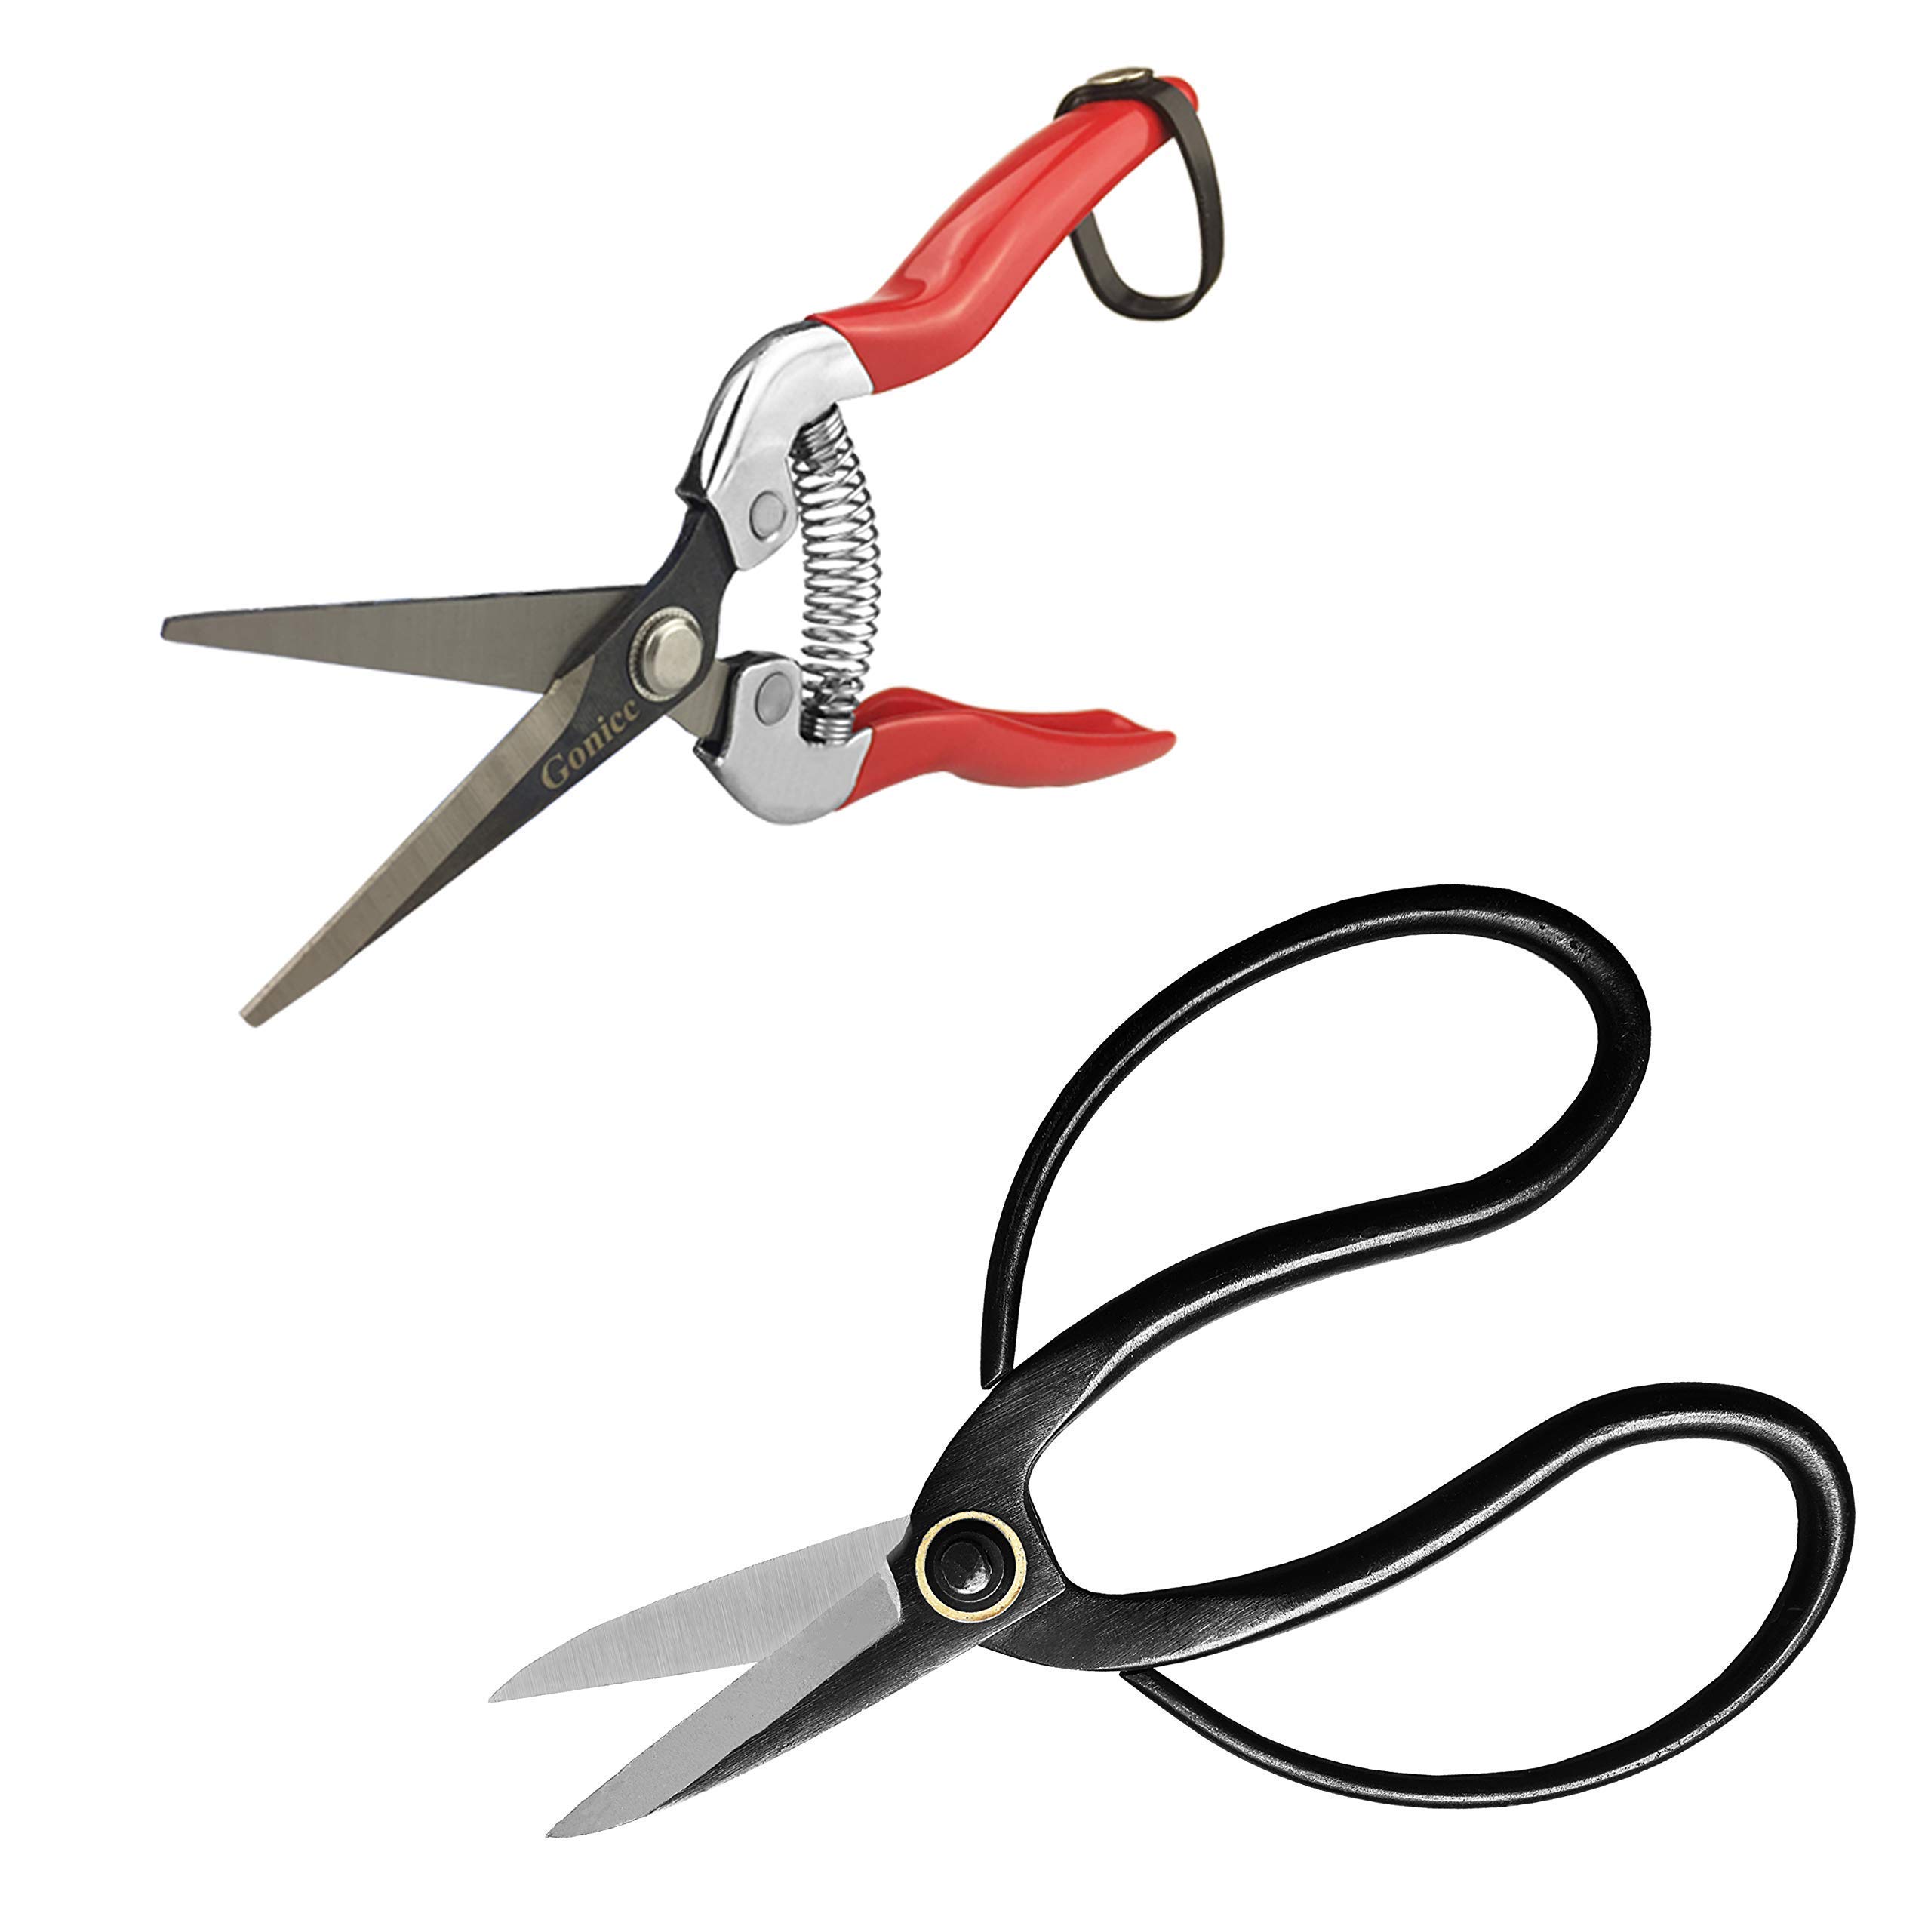 Gonicc Professional Micro-Tip Pruning Snip (GPPS-1008) and 7.3" Bonsai Scissors(GPPS-1012), For Arranging Flowers, Trimming Plants, For Grow Room or Gardening, Bonsai Tools. Garden Scissors Loppers.